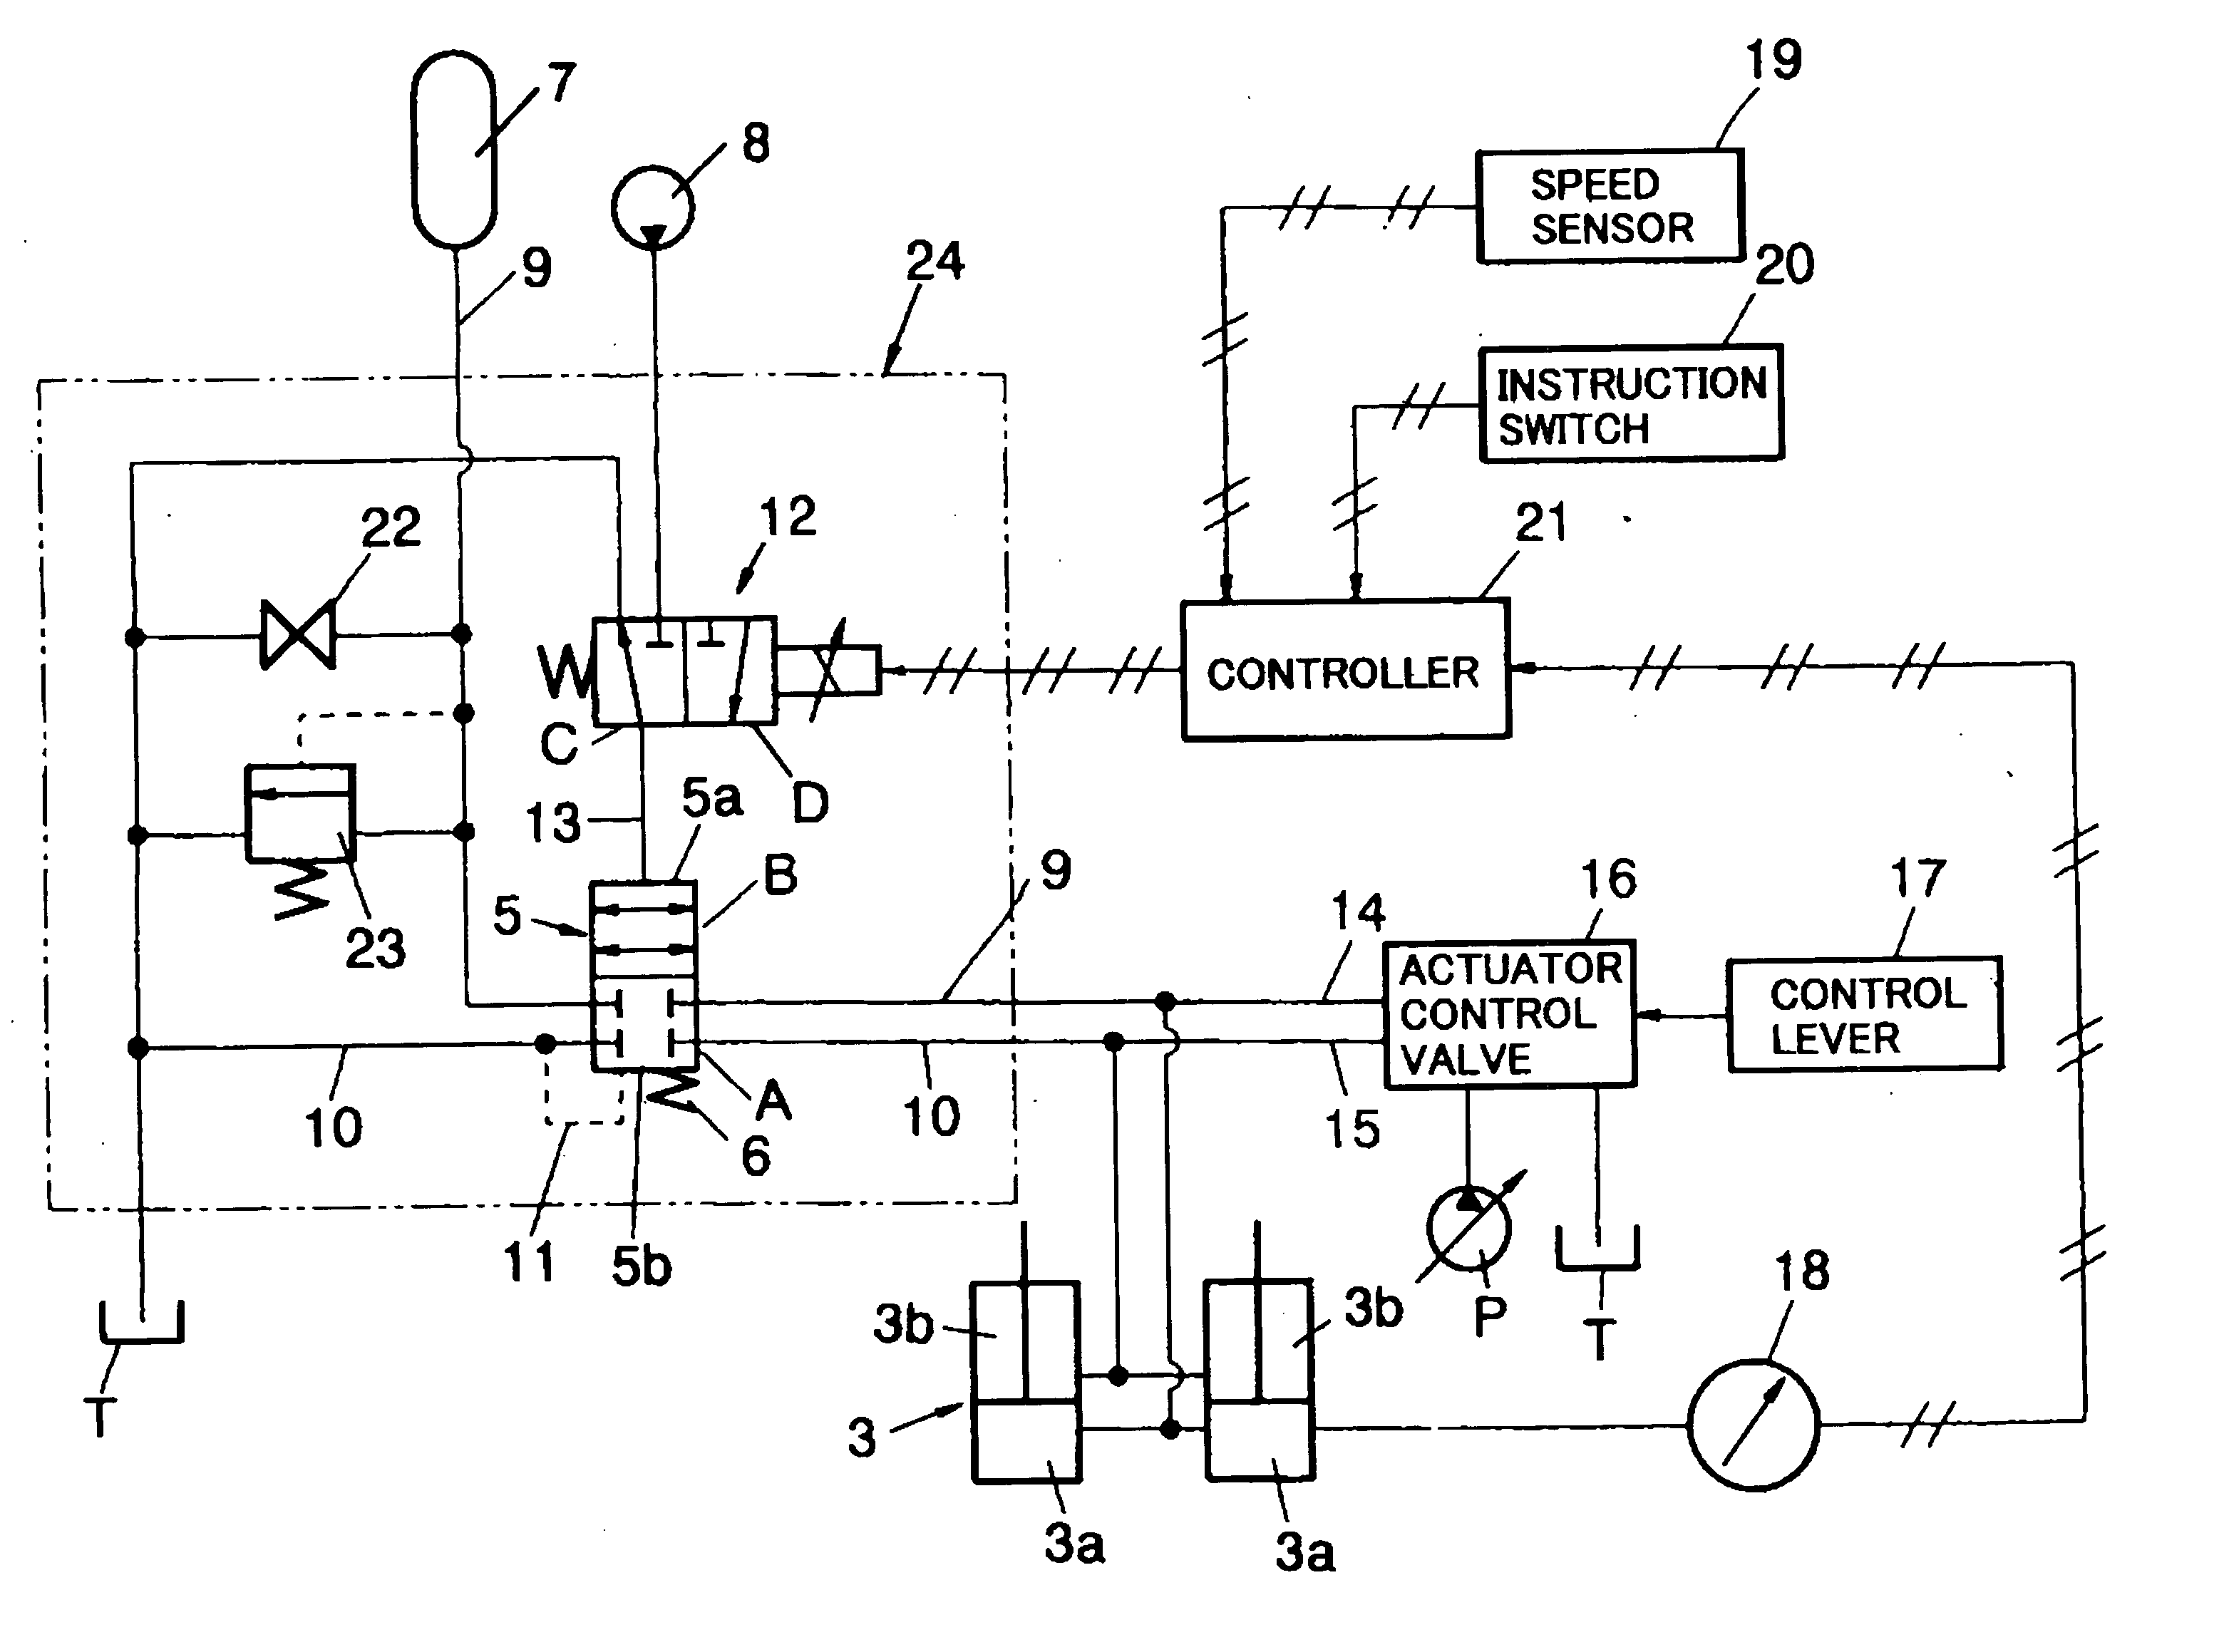 Hydraulic ride control system for working vehicle